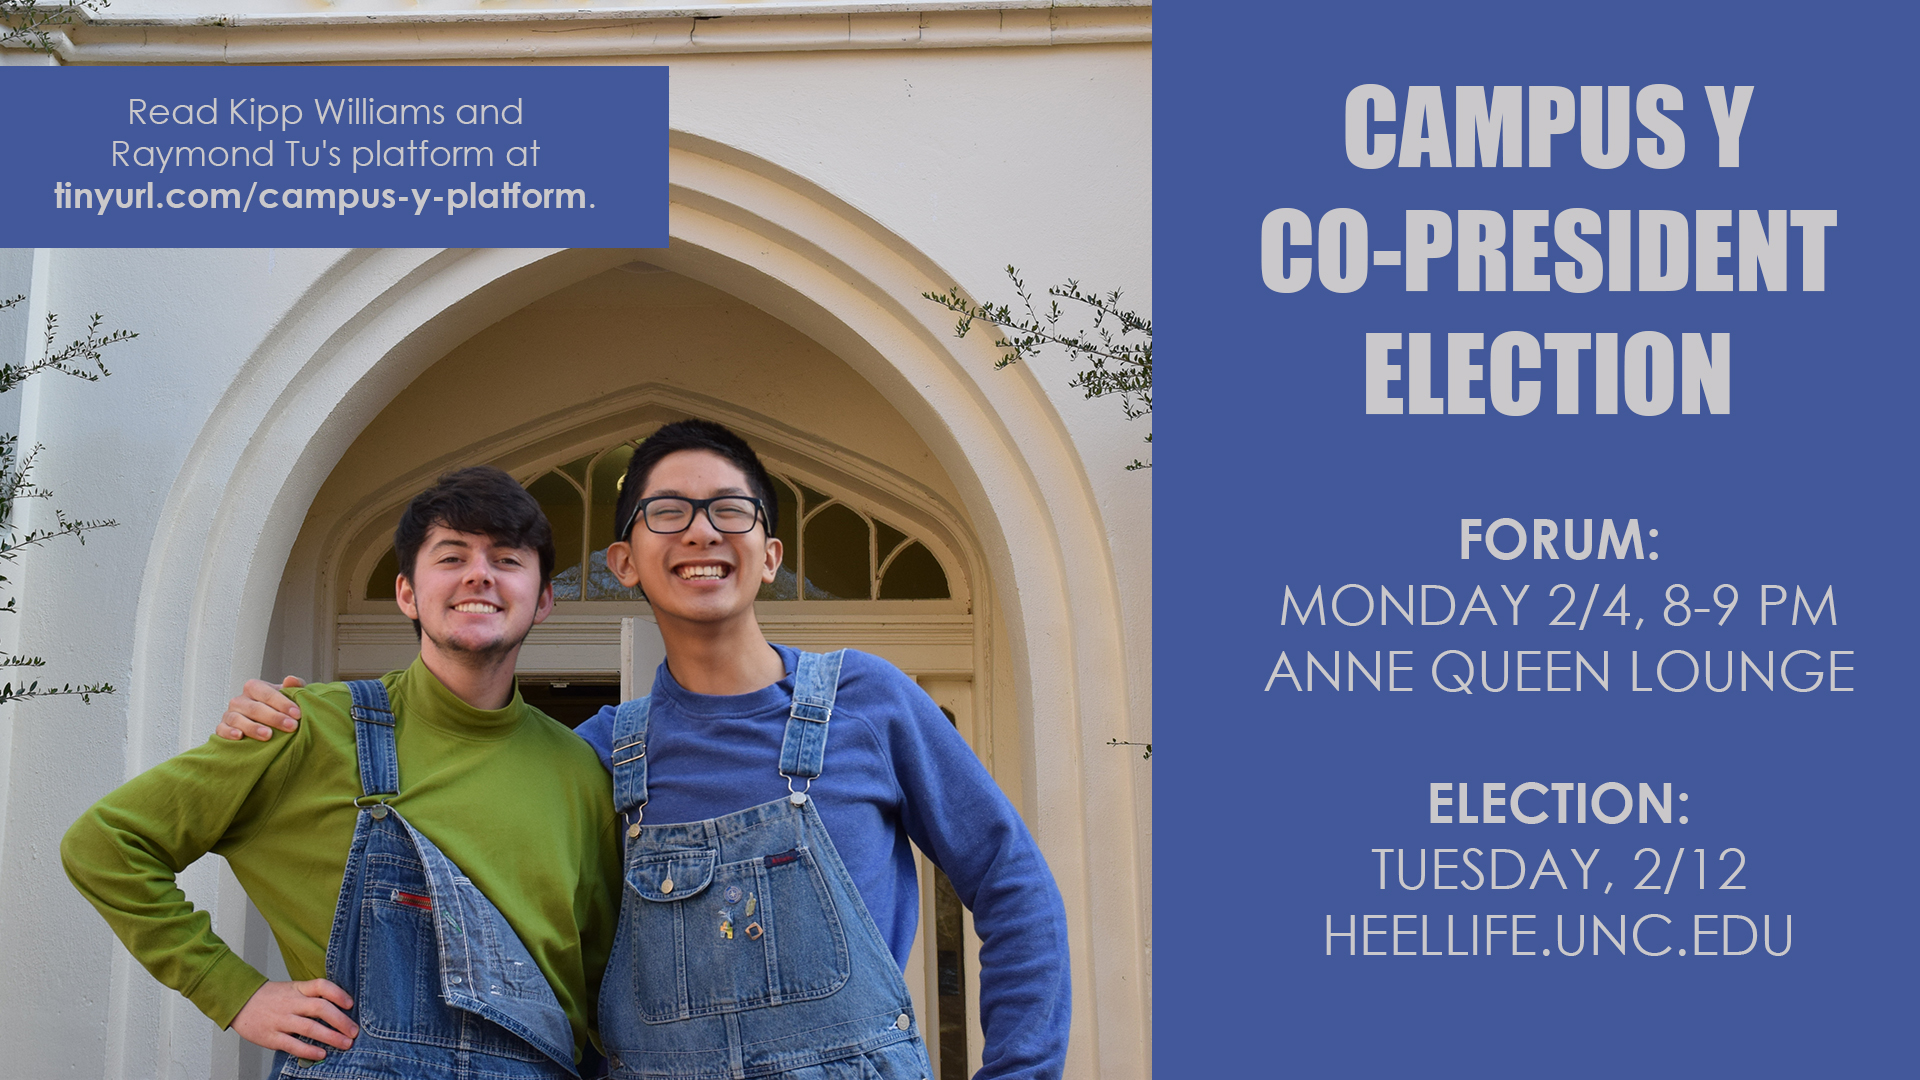 Campus Y Co-President Election! Vote on Tuesday, 2/12.